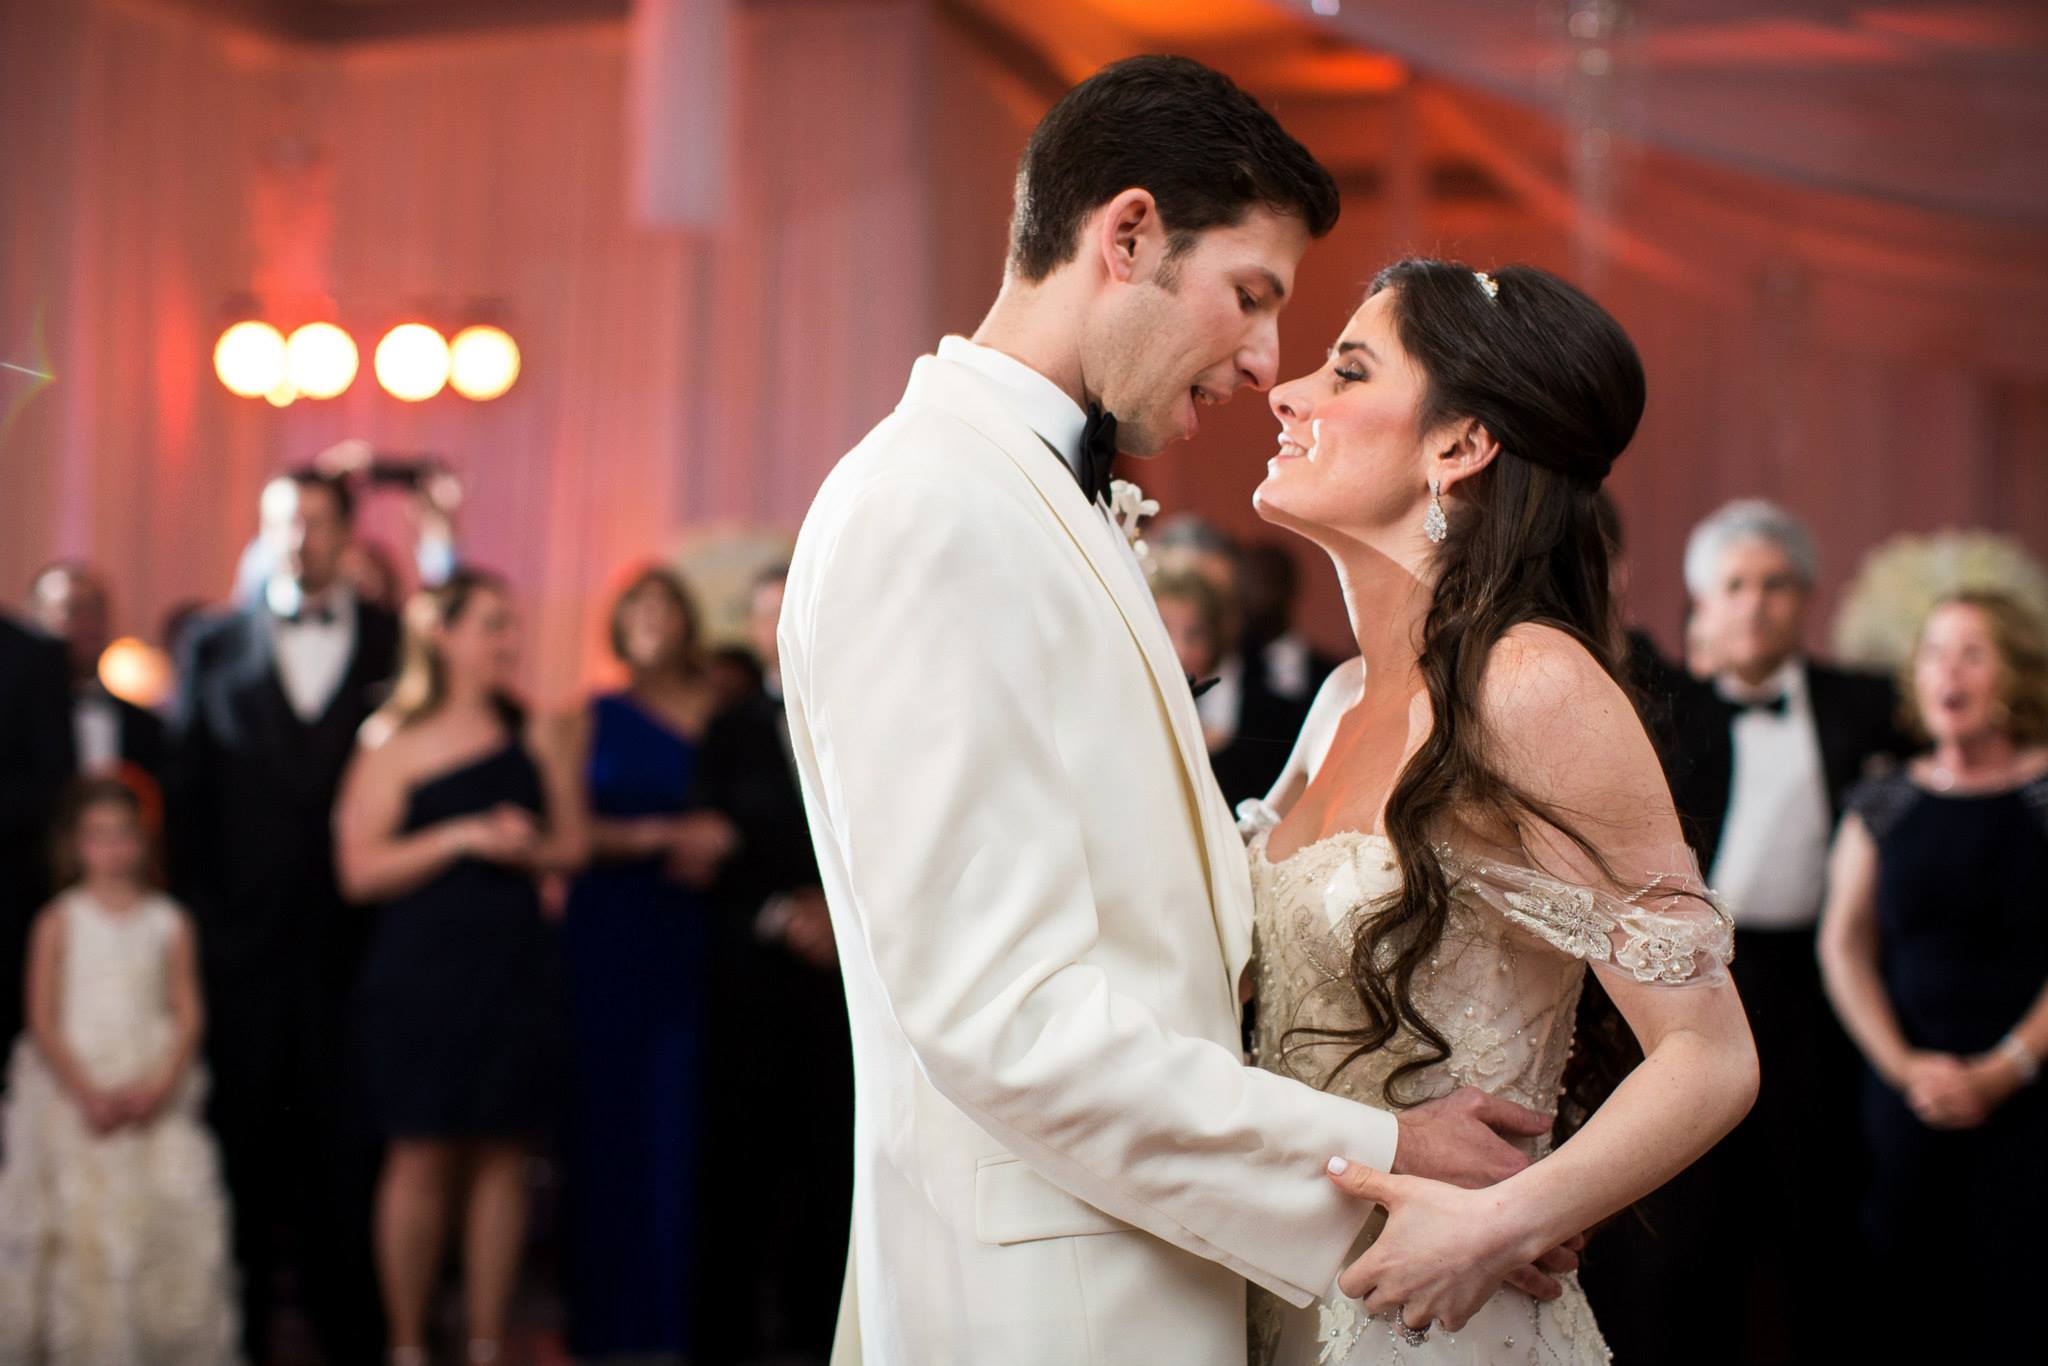 first-dance-boca-raton-the-polo-club-wedding-artist-ben-keys-wed-on-canvas-off-the-shoulder-monique-lhuillier-gown-luxe-wedding-artist-ben-keys-wed-on-canvas